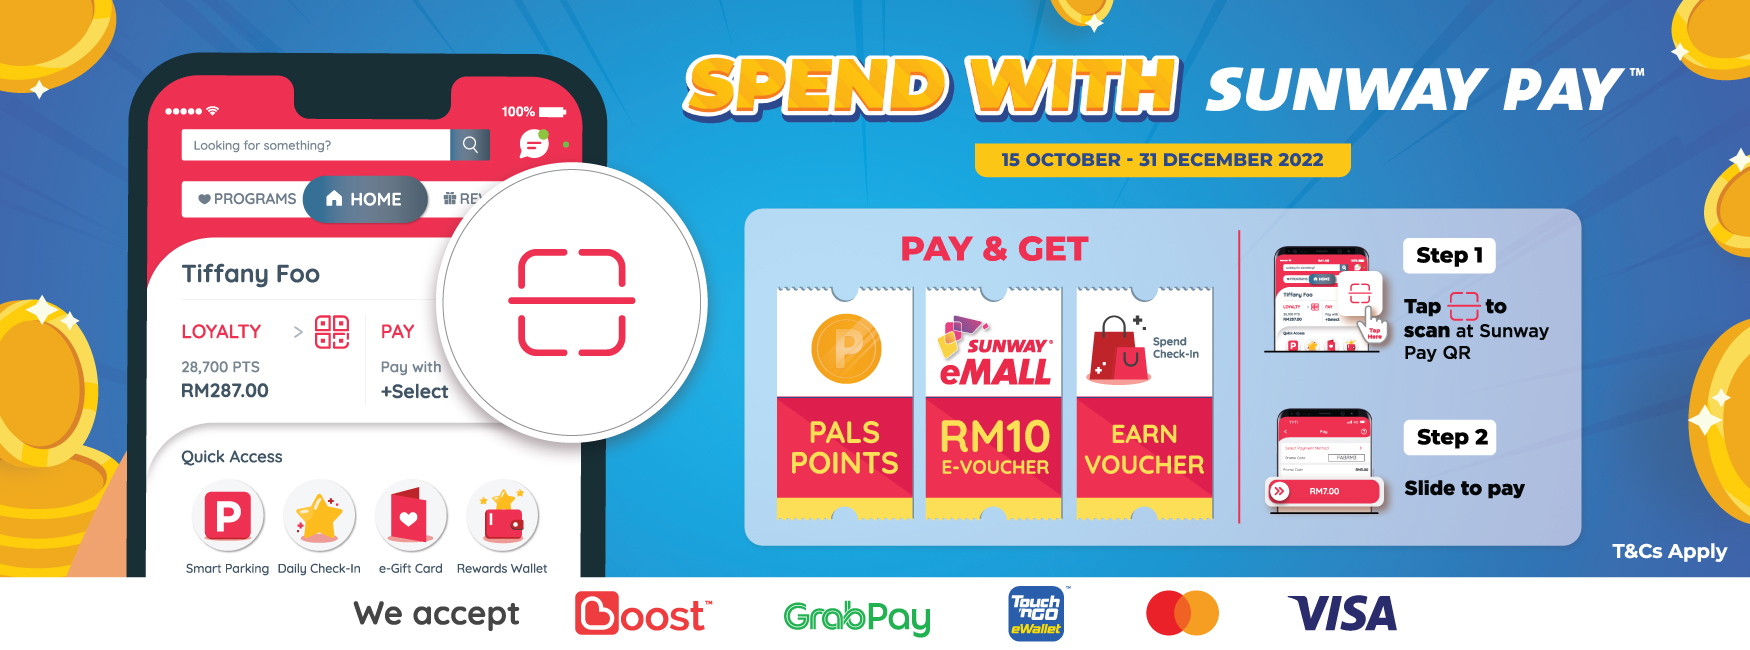 RECEIVE FREE VOUCHER WHEN YOU SPEND WITH SUNWAY PAY! 